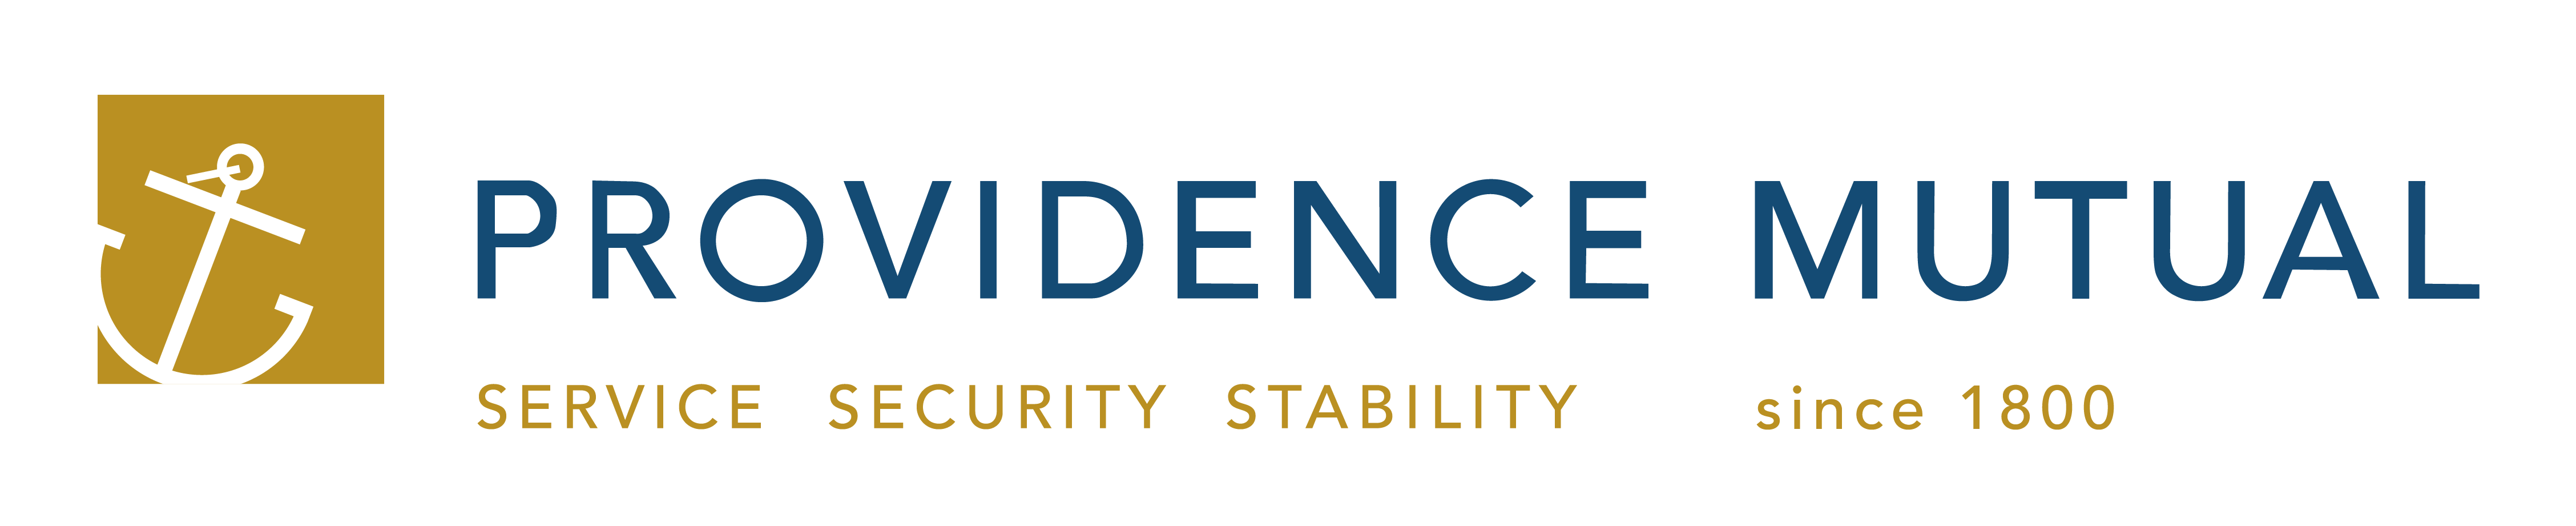 providence mutual logo in color